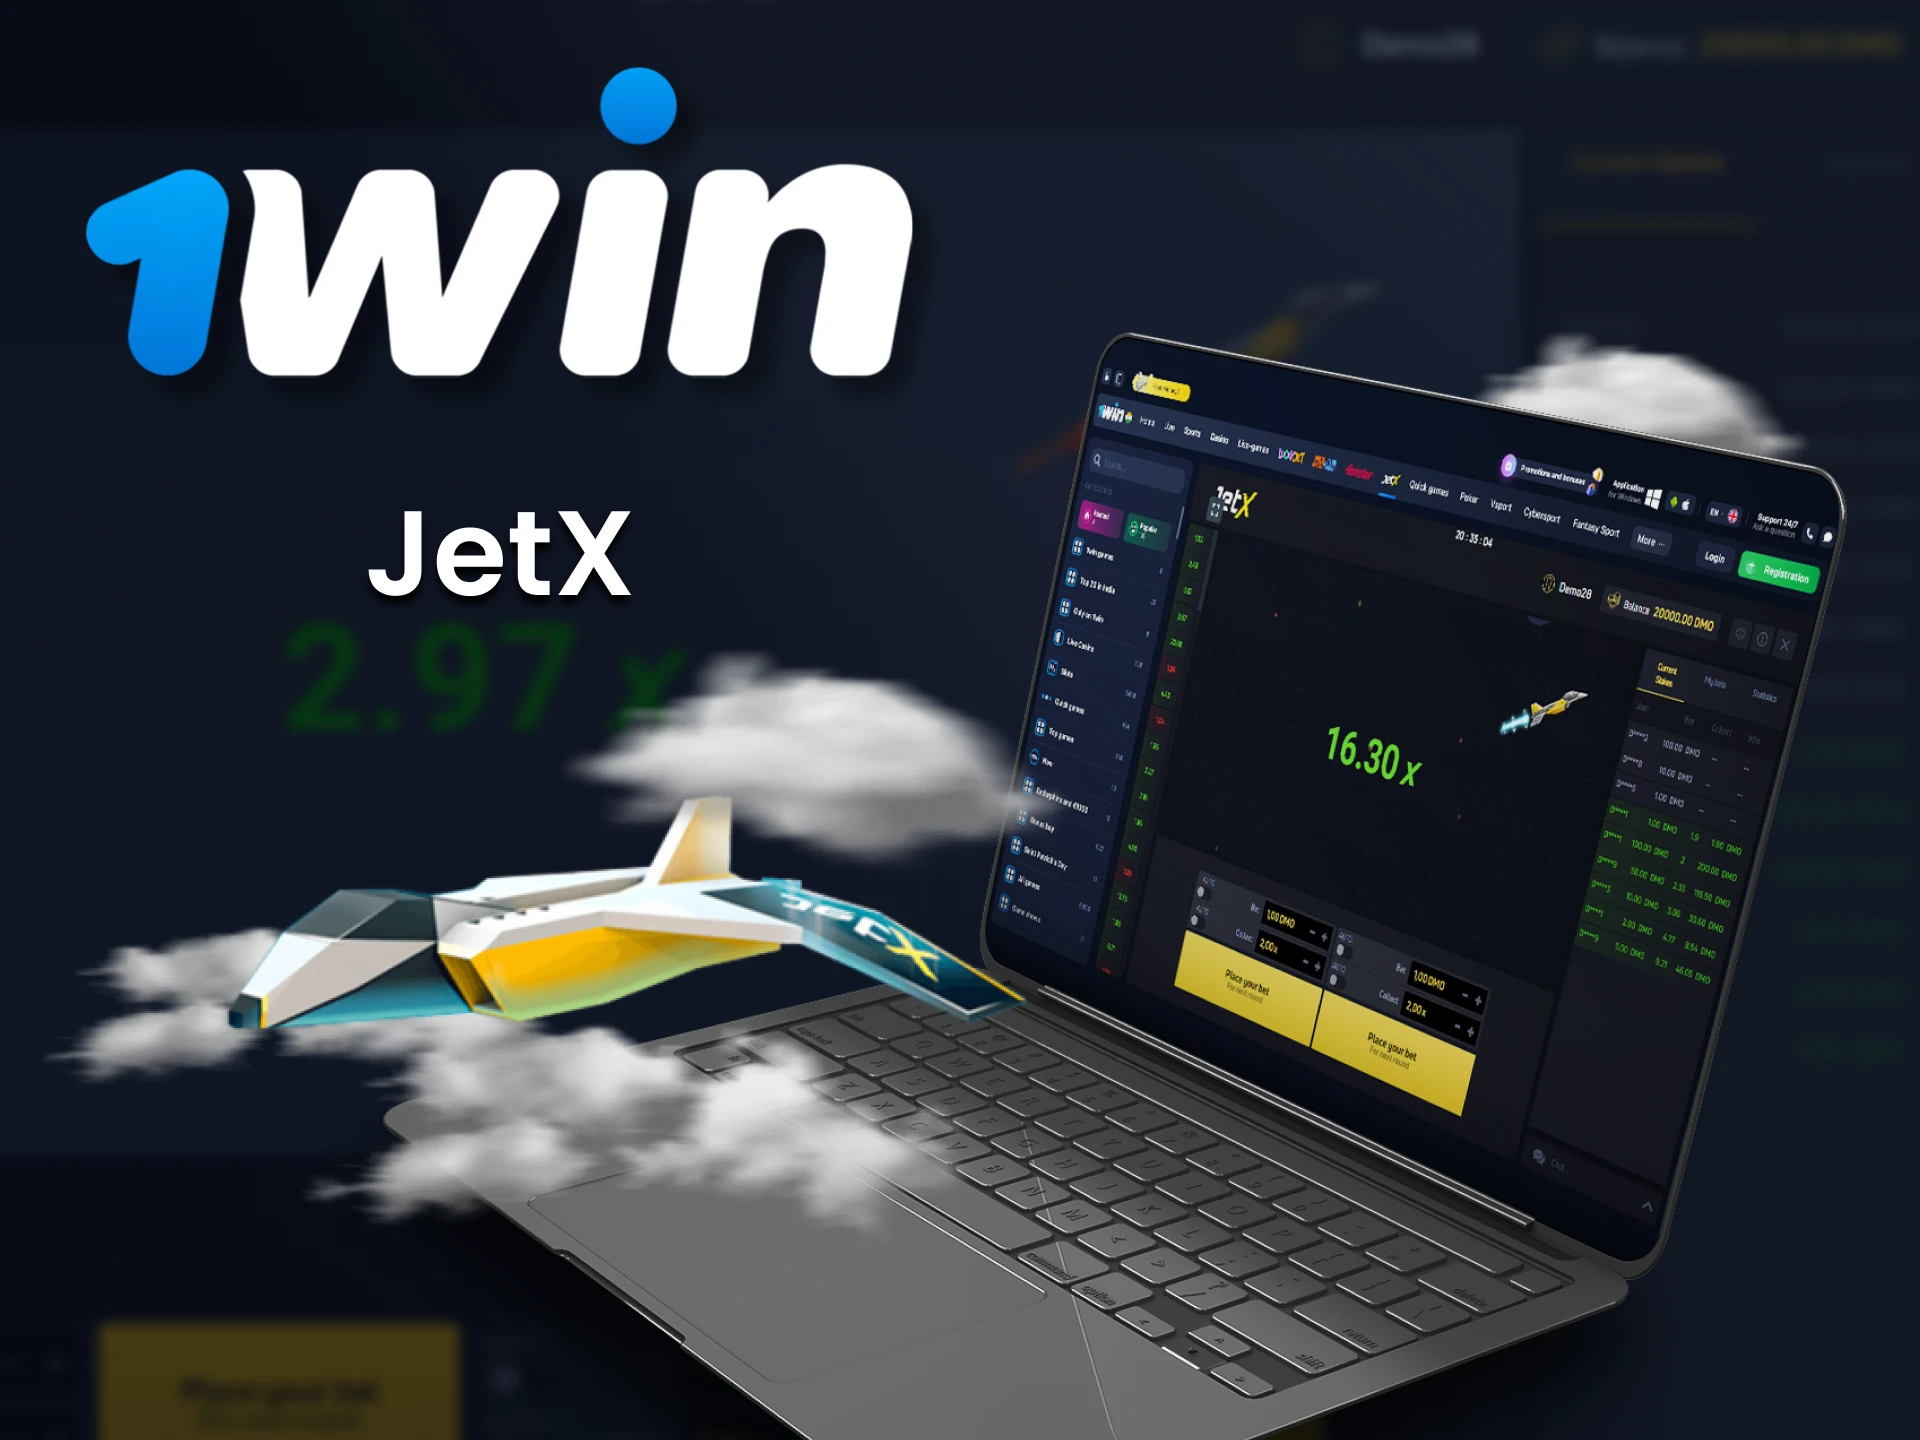 Play the rocket game JetX in 1win casino.